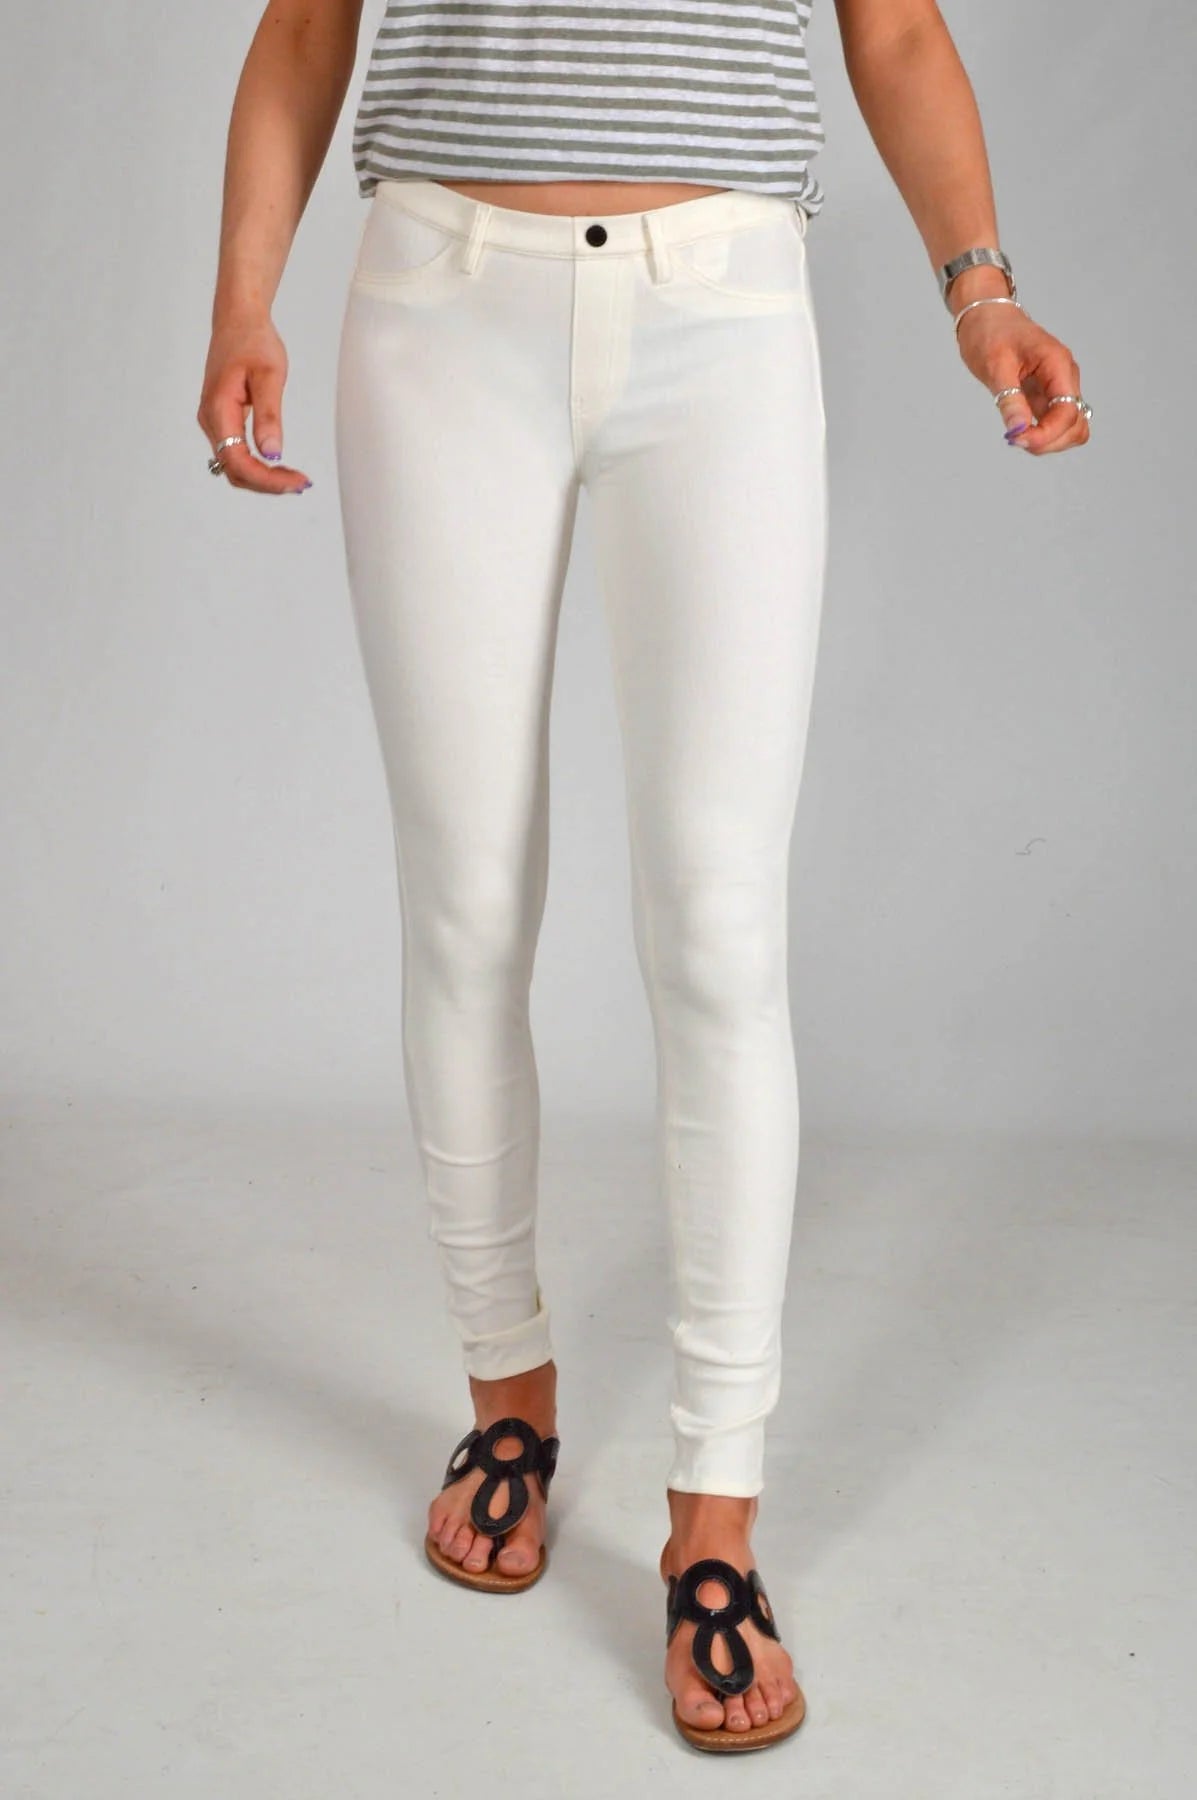 Hollister White Jeggings Size 15 - 67% off